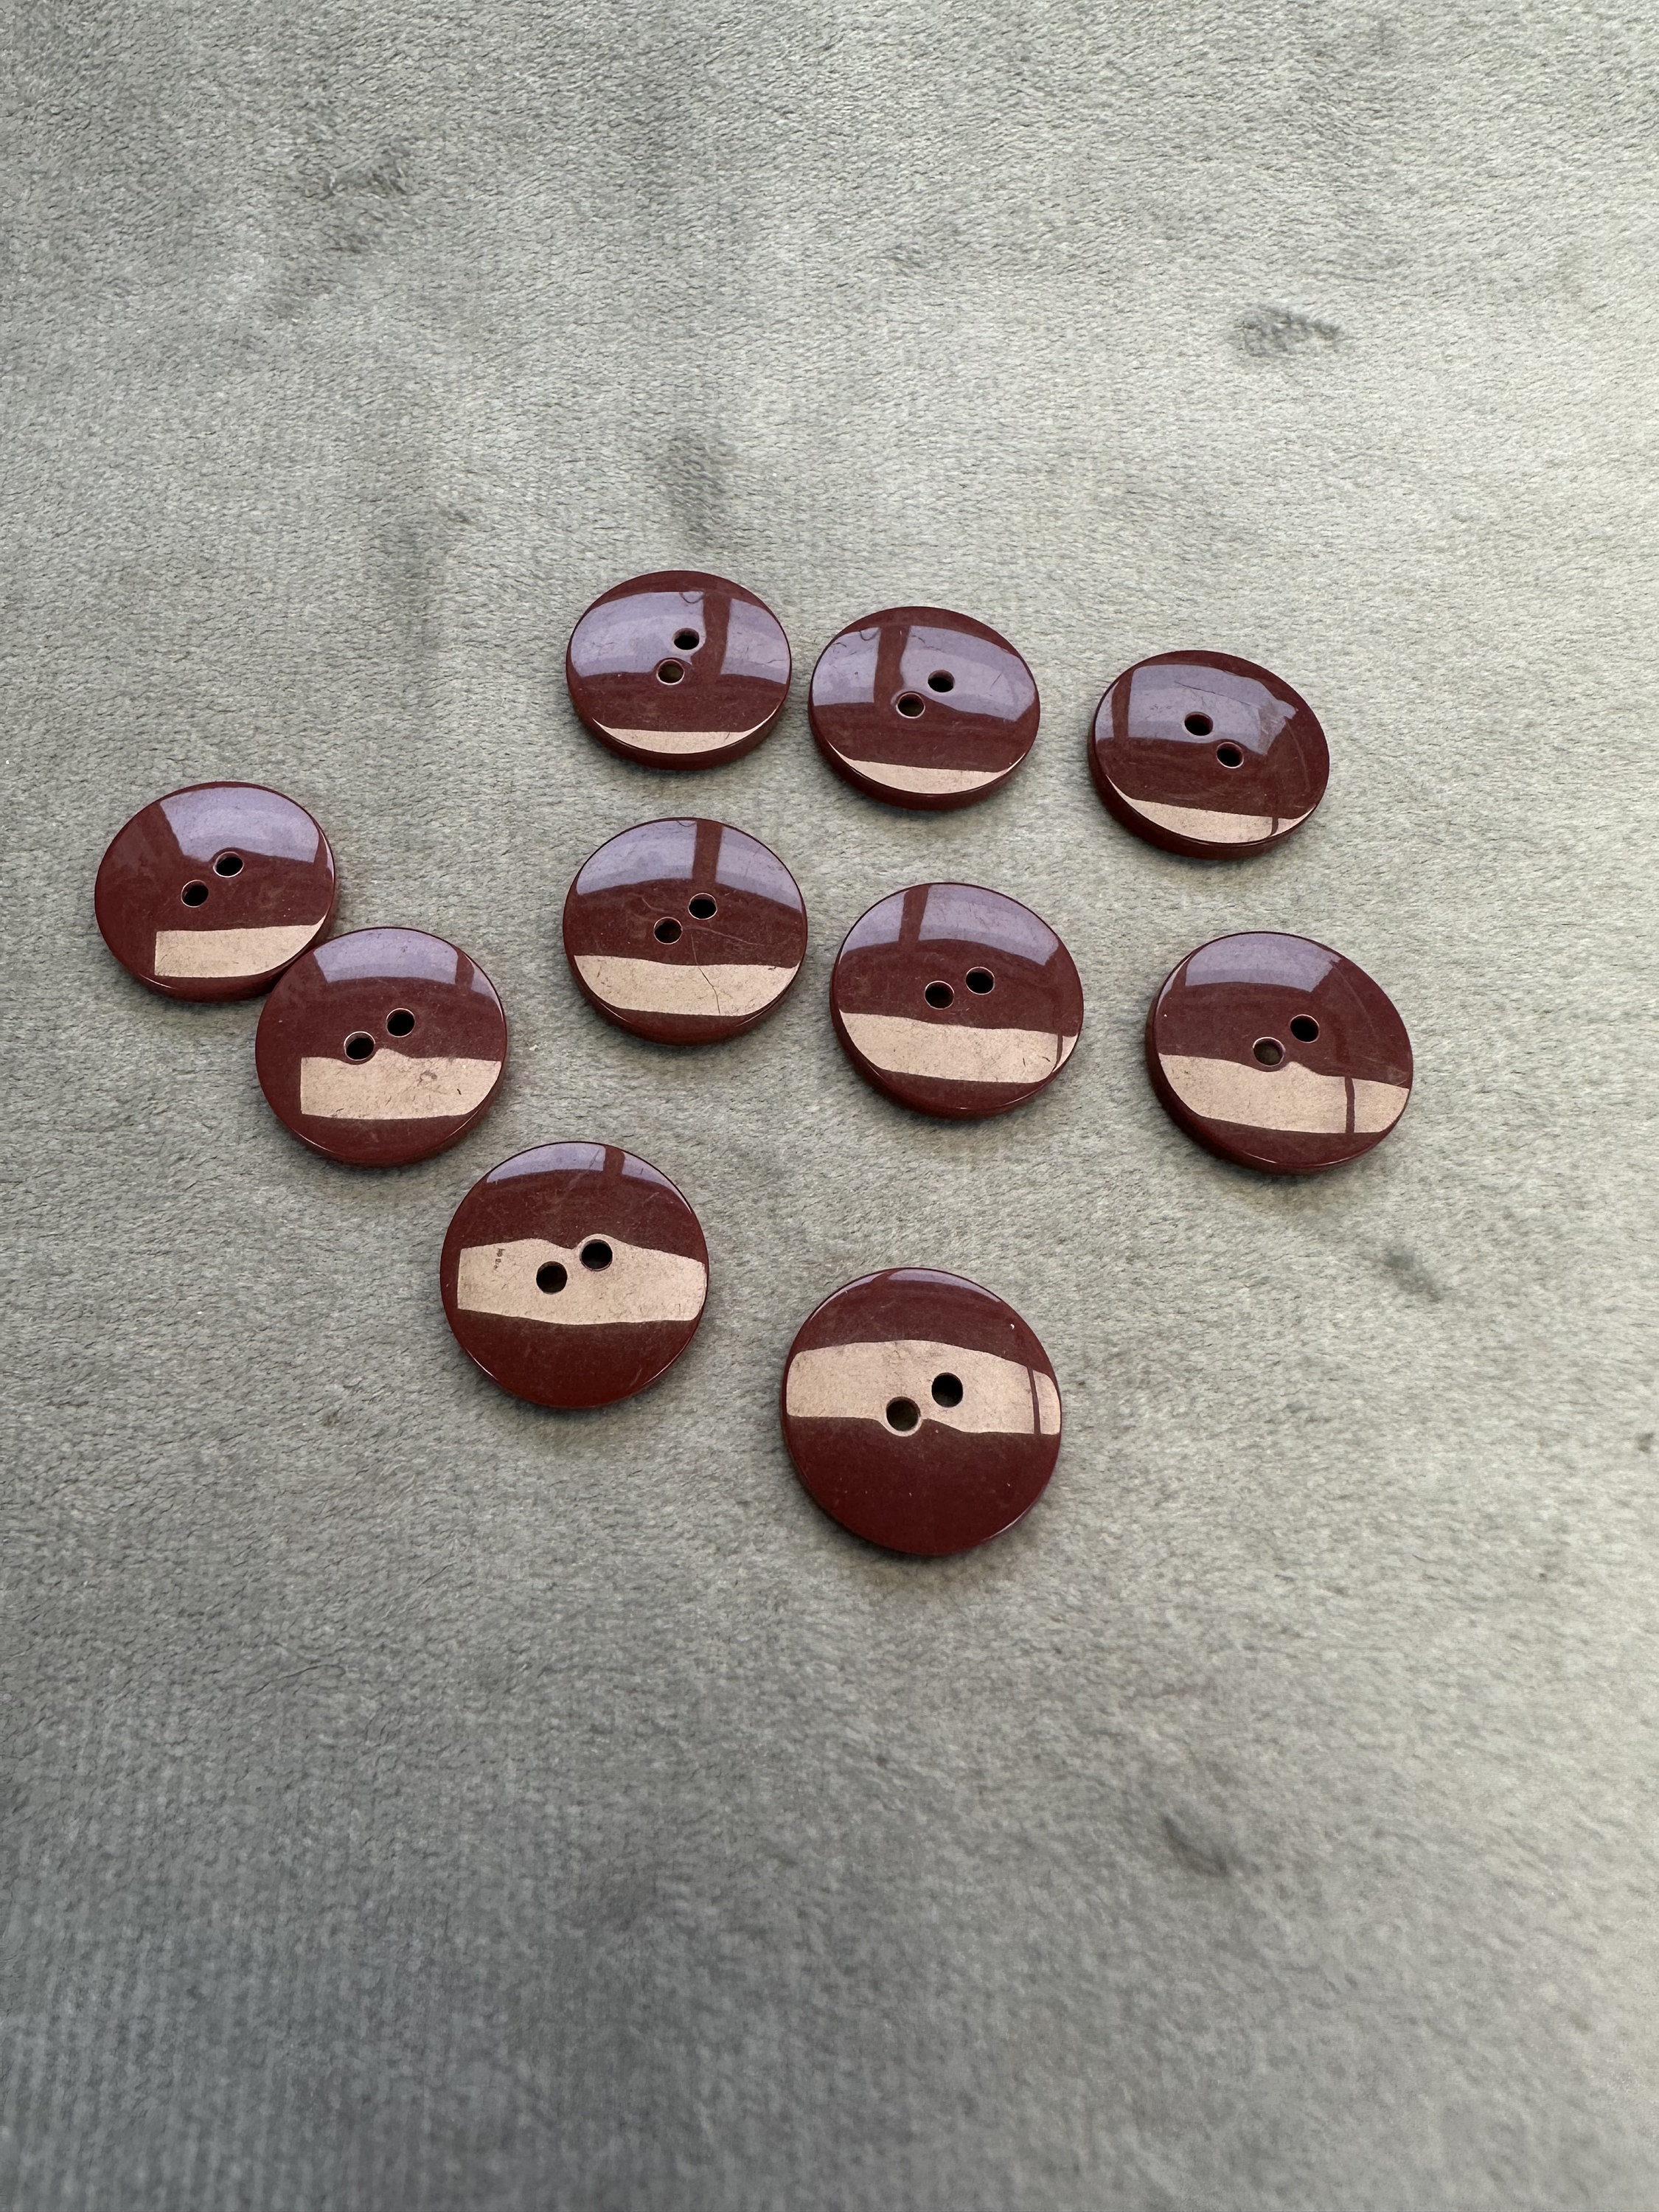 10, 14mm 22L Red Resin Buttons, Red Buttons, Bright Red Buttons